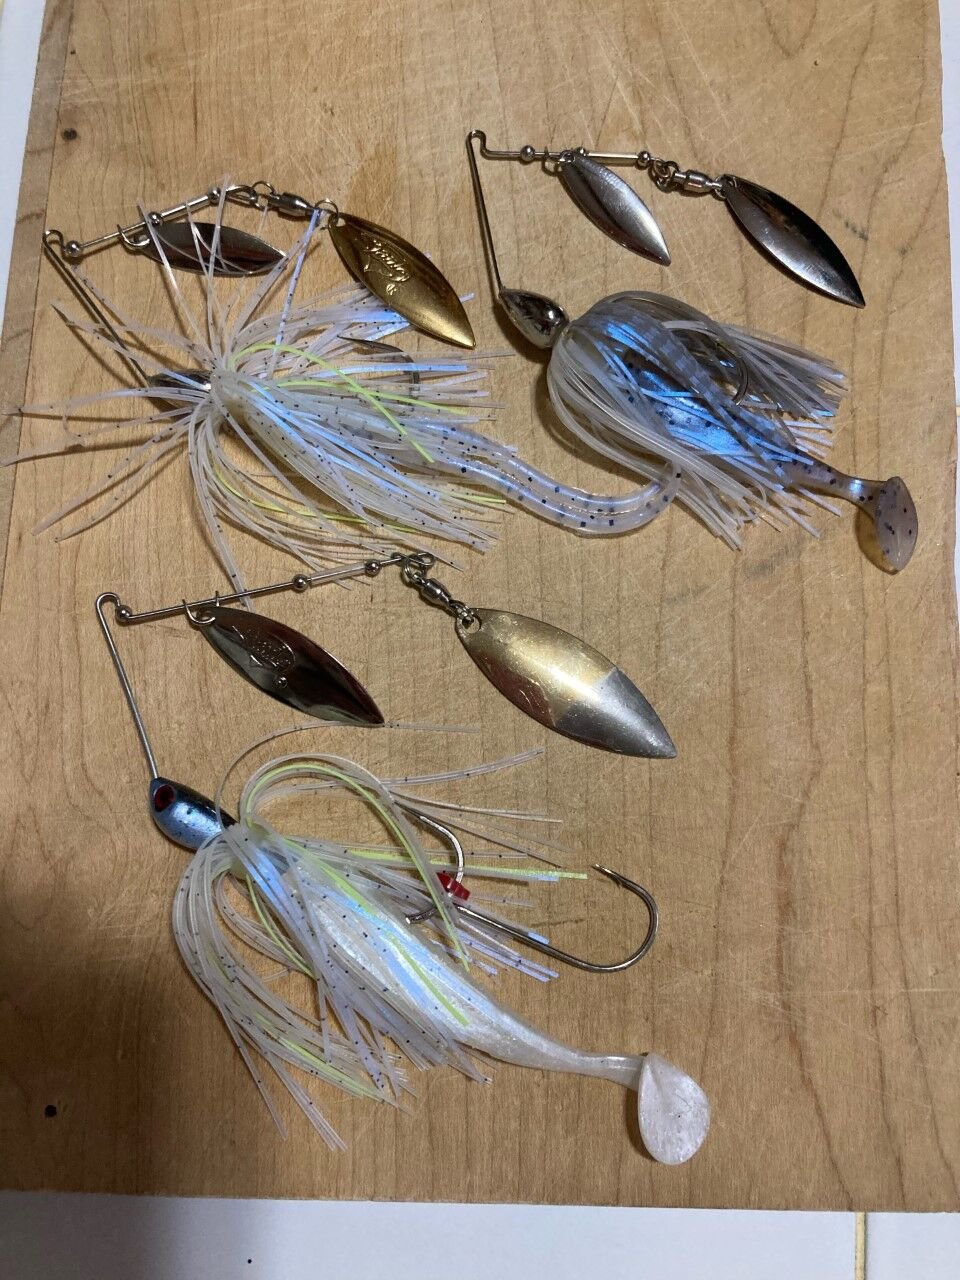 Steve Fontana continues his quest for the perfect spinnerbait, Sports